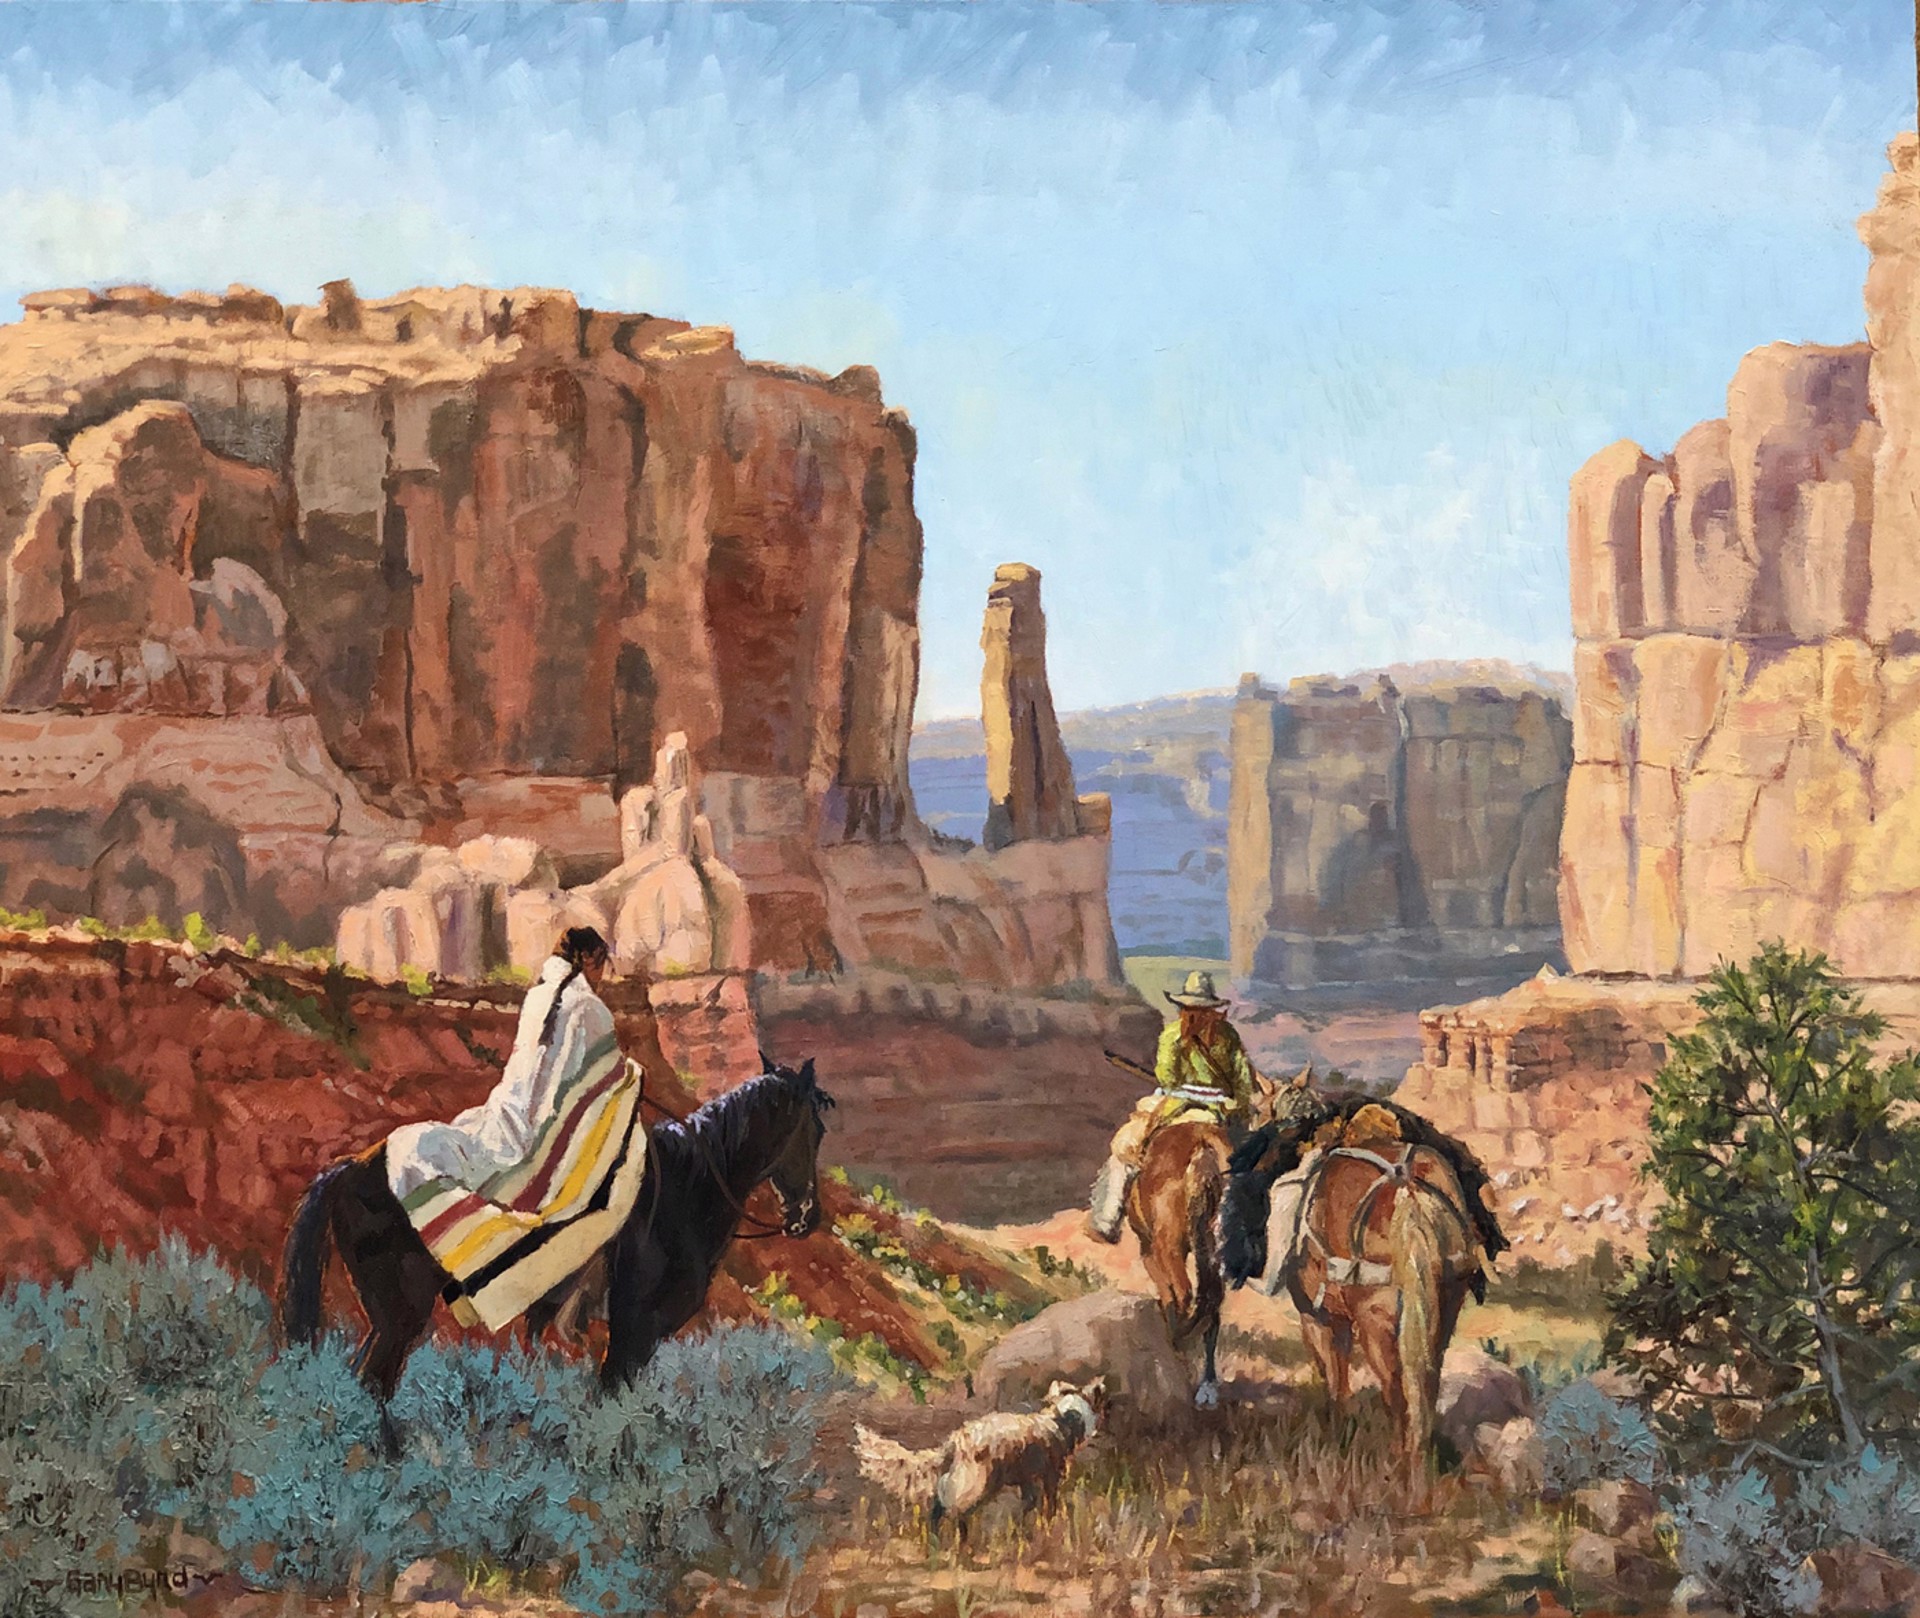 Into Ute Territory by Gary Byrd